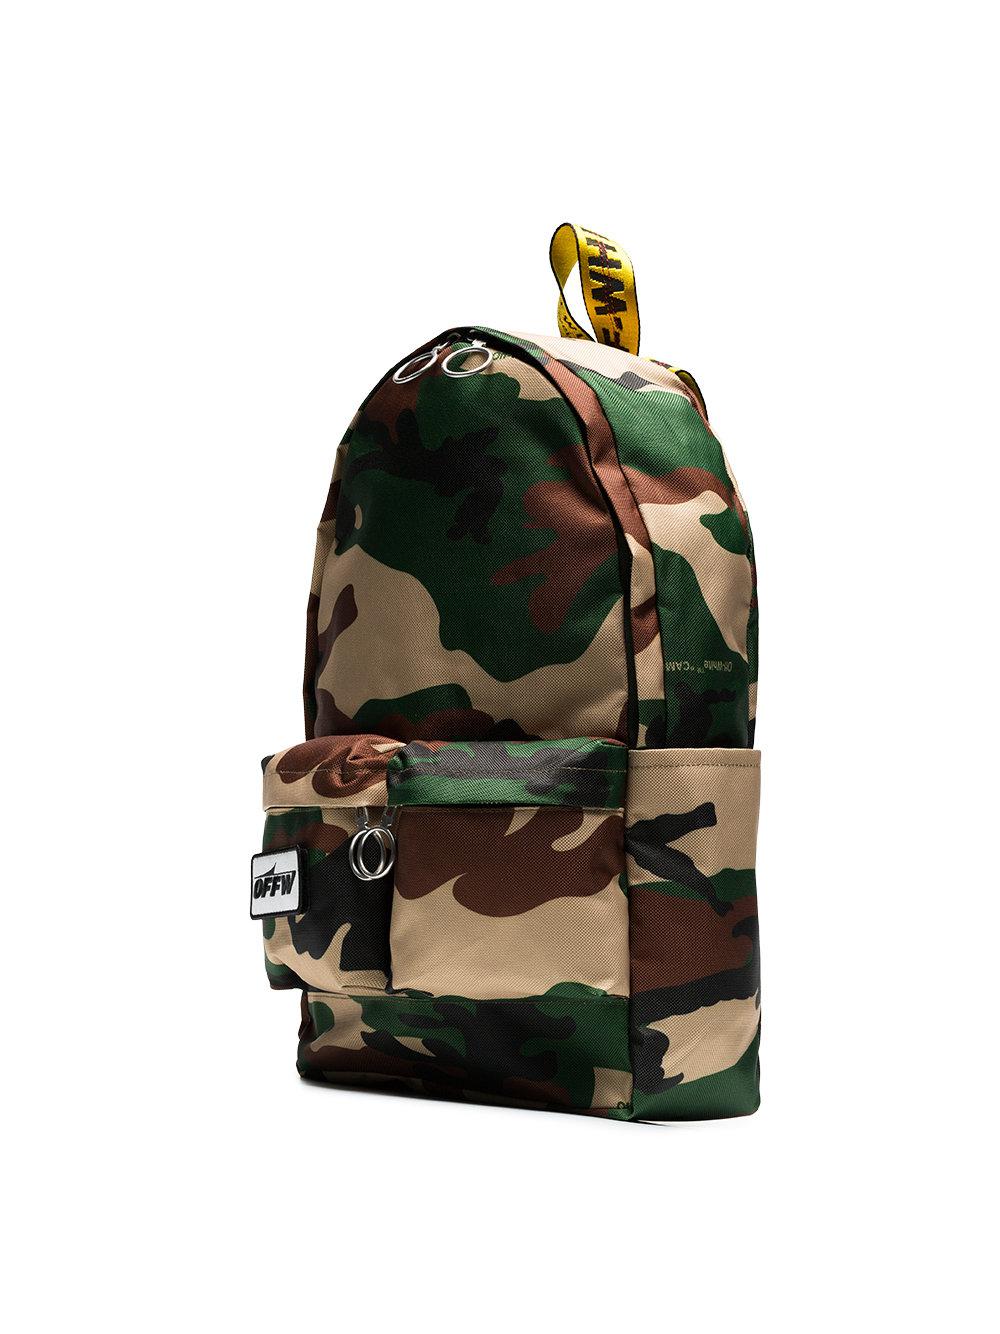 Mens Backpacks Off-White c/o Virgil Abloh Backpacks for Men Off-White c/o Virgil Abloh Synthetic Arrows Tuc Camouflage Printed Zip Detailed Backpack in Military Black Save 14% 